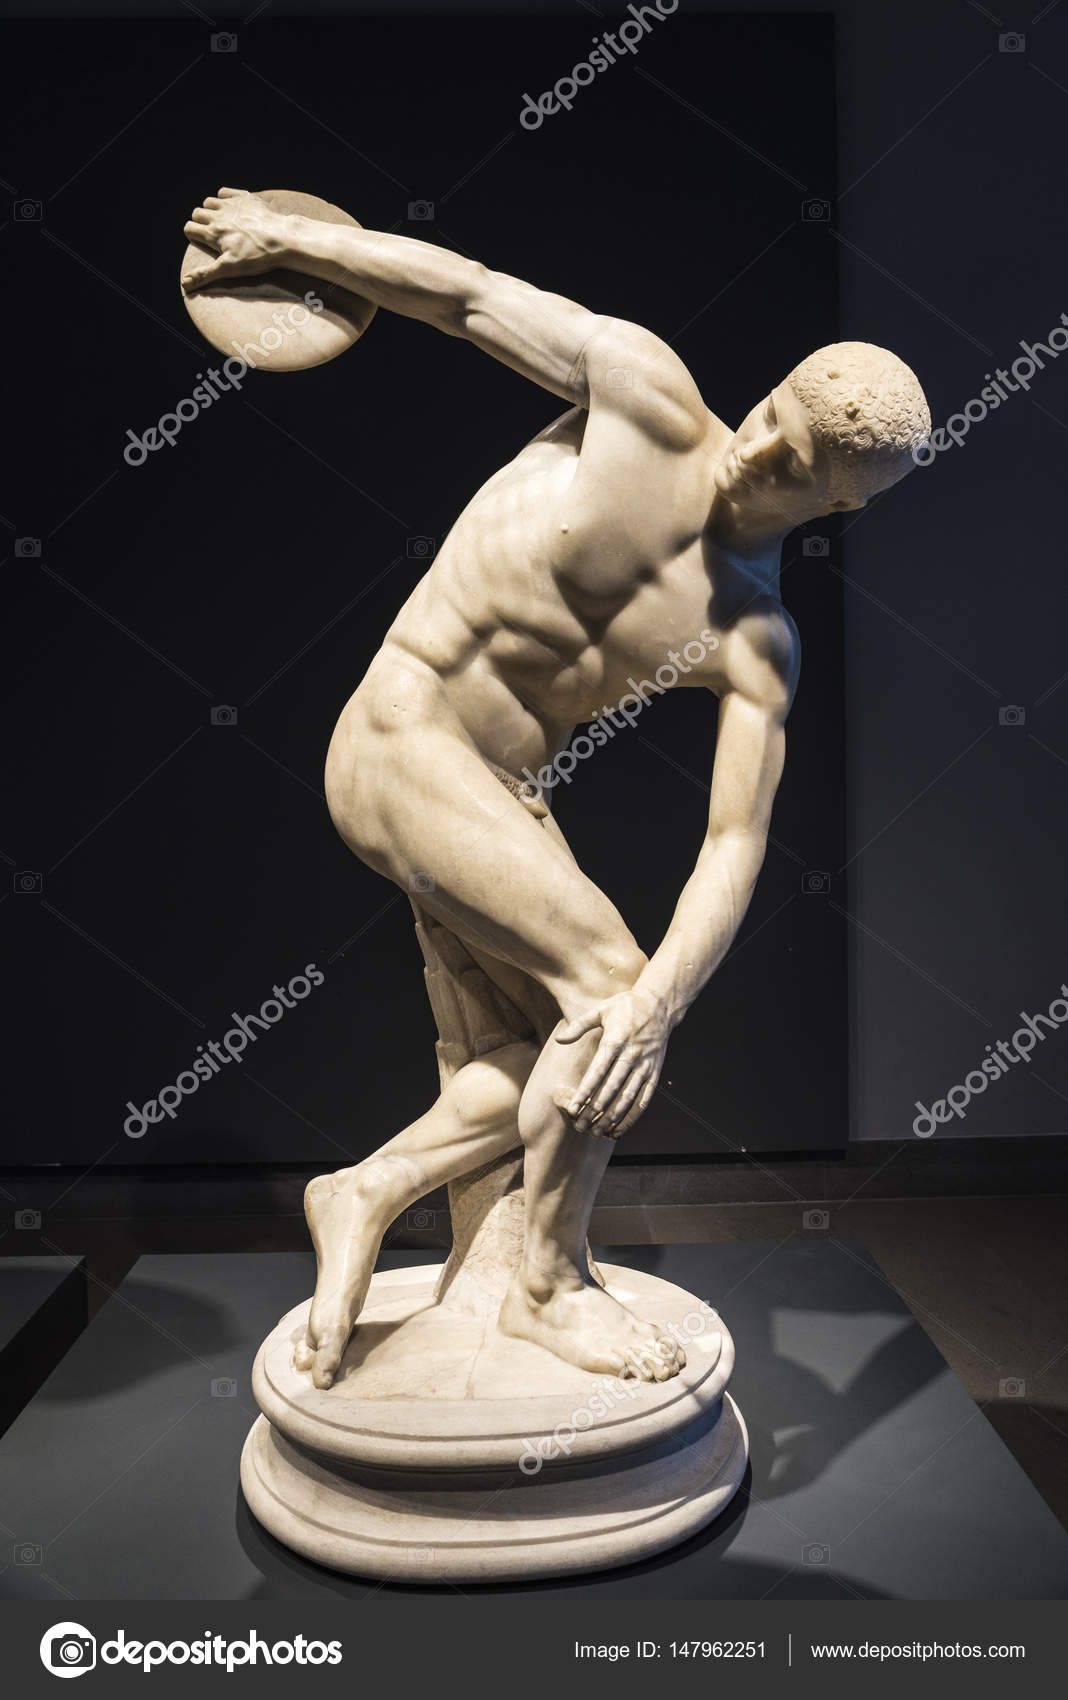 Discus thrower statue Stock Photos, Royalty Free Discus thrower 